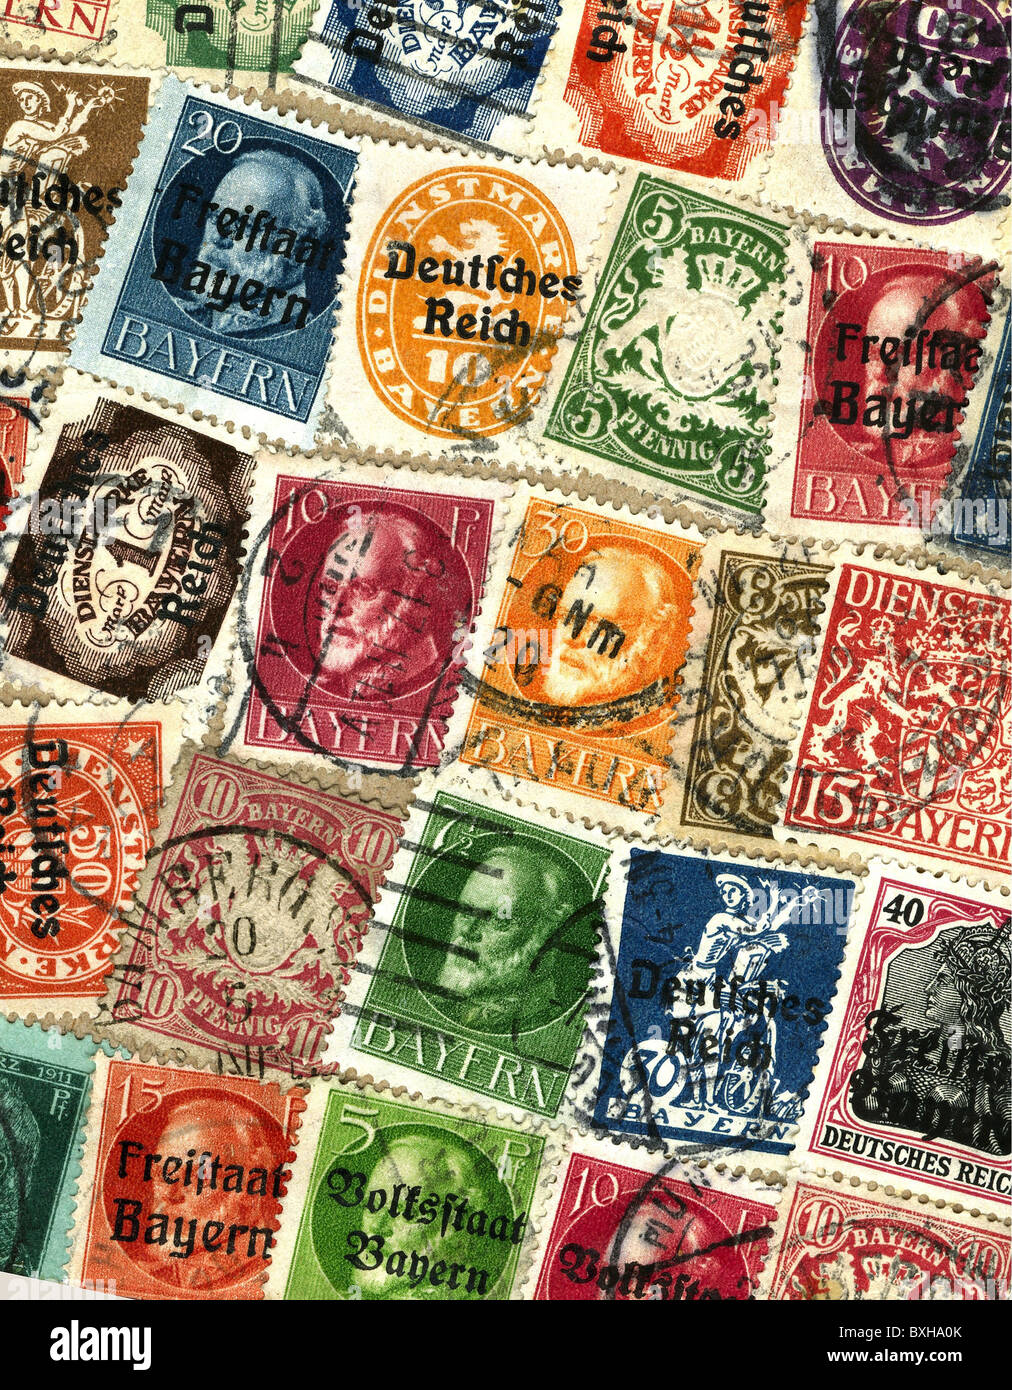 mail / post, postage stamps, Bavarian stamps, Bavaria, Germany, 1912 to 1920, Additional-Rights-Clearences-Not Available Stock Photo